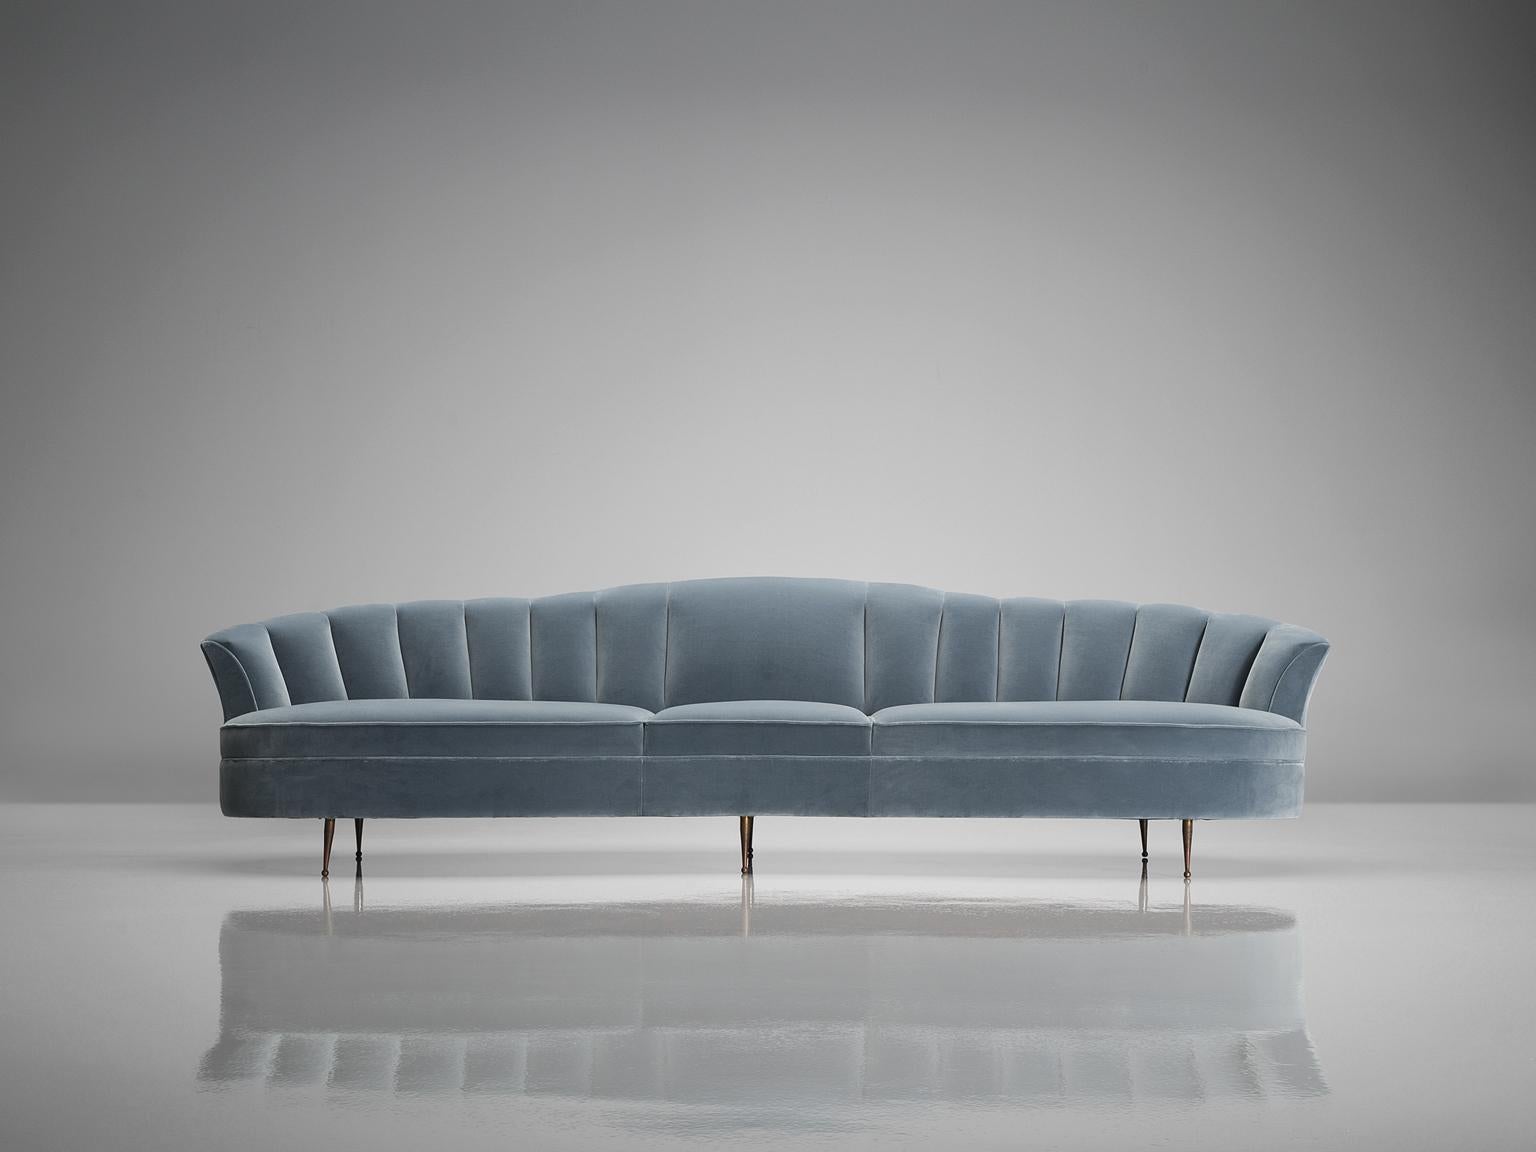 Large customizable sofa, fabric, brass, Italy, 1950s

Large sofa with elegant Italian design. The long sofa rests on brass legs. The seat is structured in three parts. With the rounded backrest that gets higher towards the middle and its design into